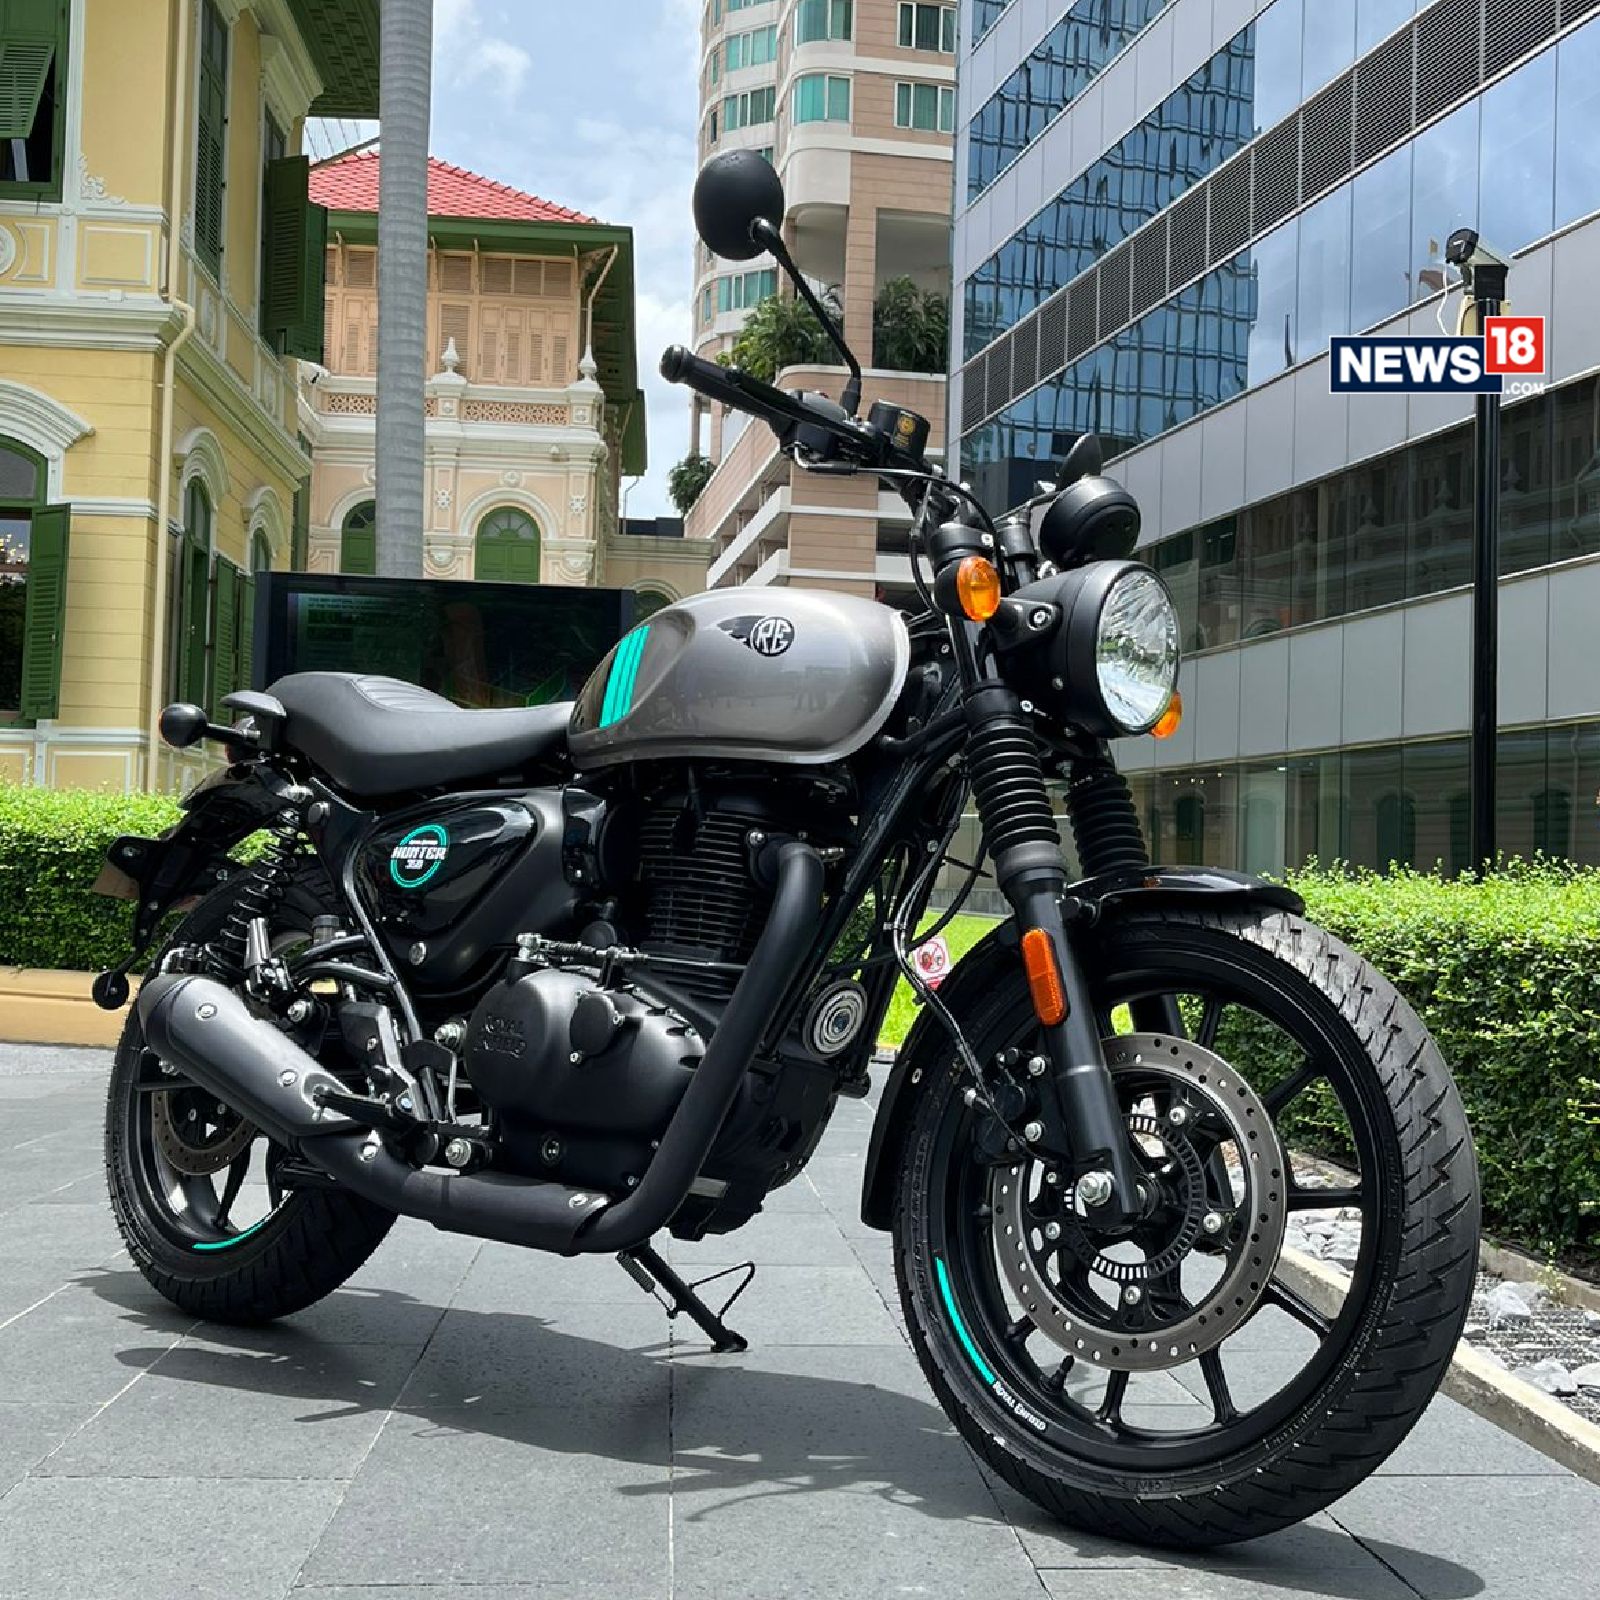 Royal Enfield Hunter 350 In Pics: Check Out It's Looks, Features and More in Detaill